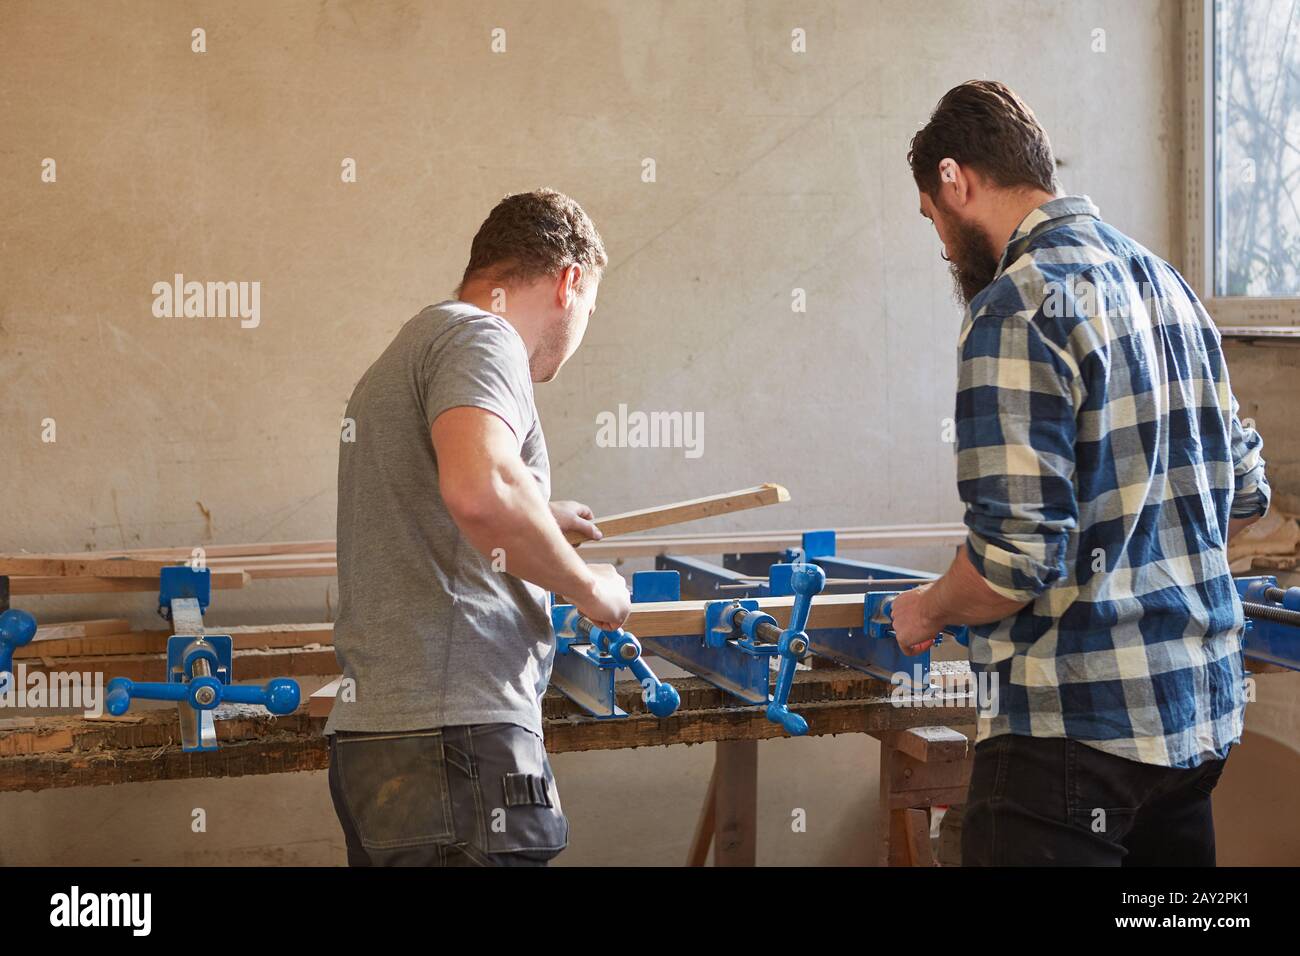 Carpenter team works together on the vice in the furniture workshop Stock Photo